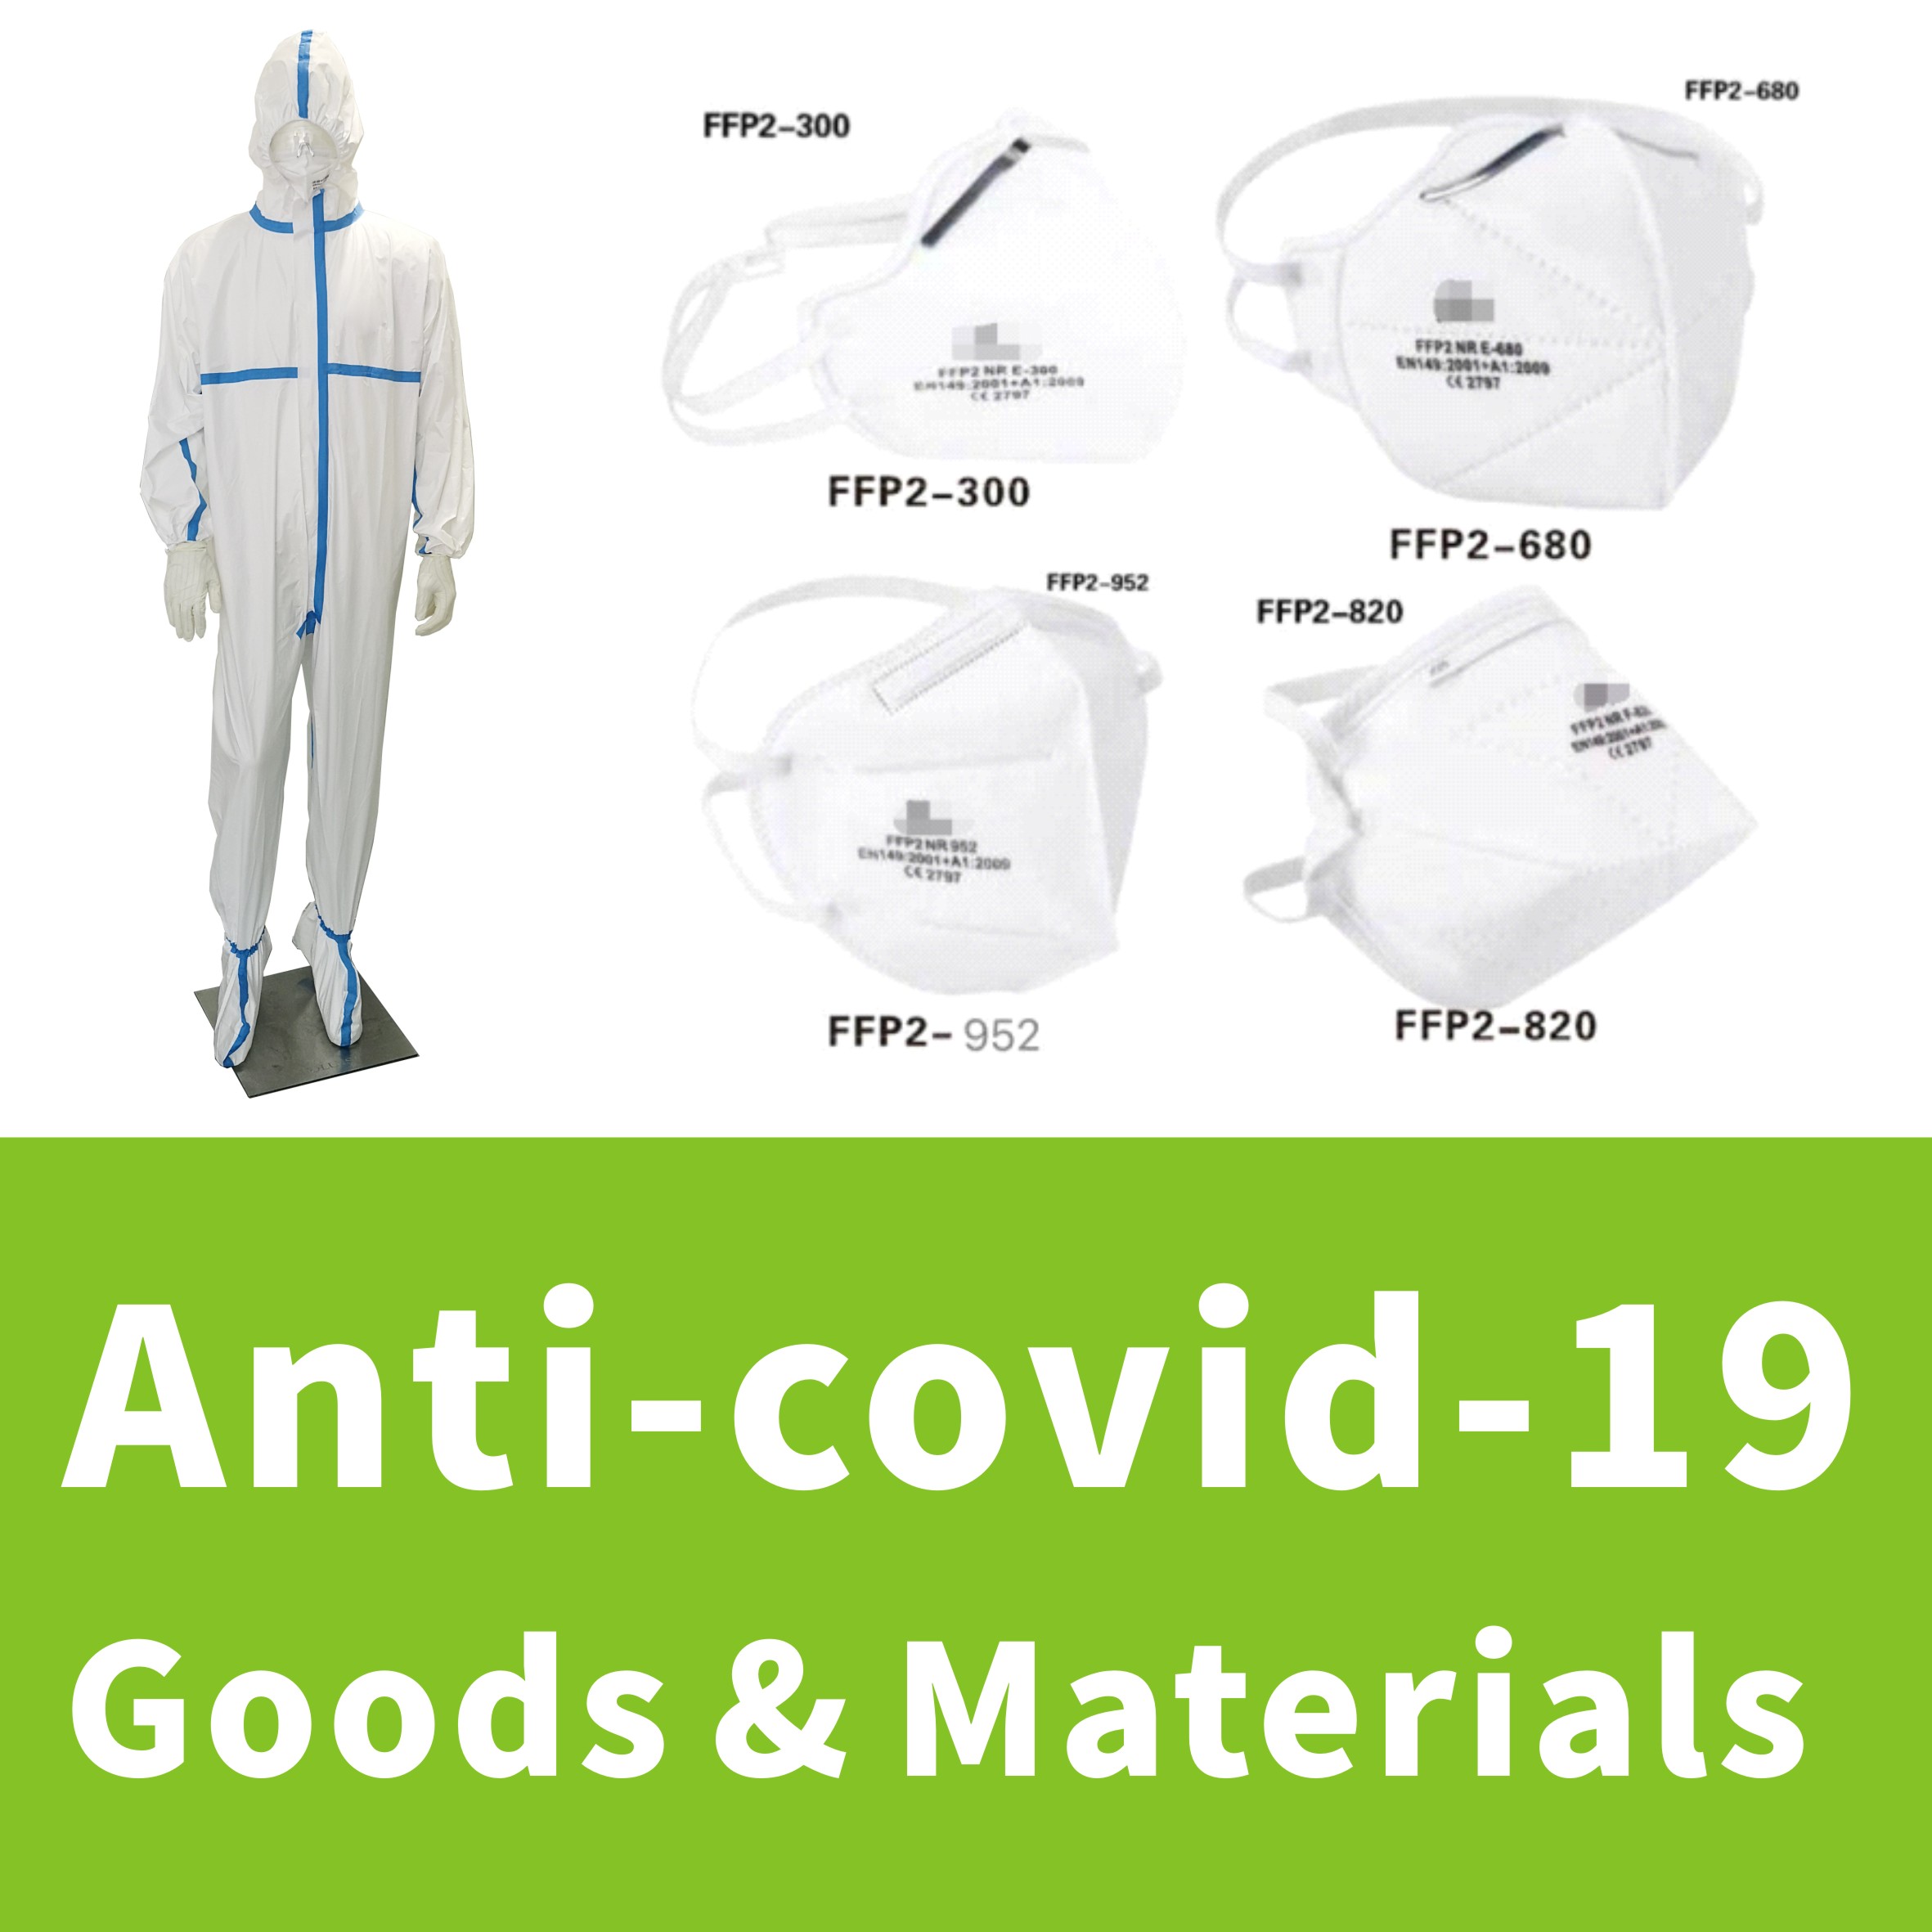 anti-Covid-19 goods and materials